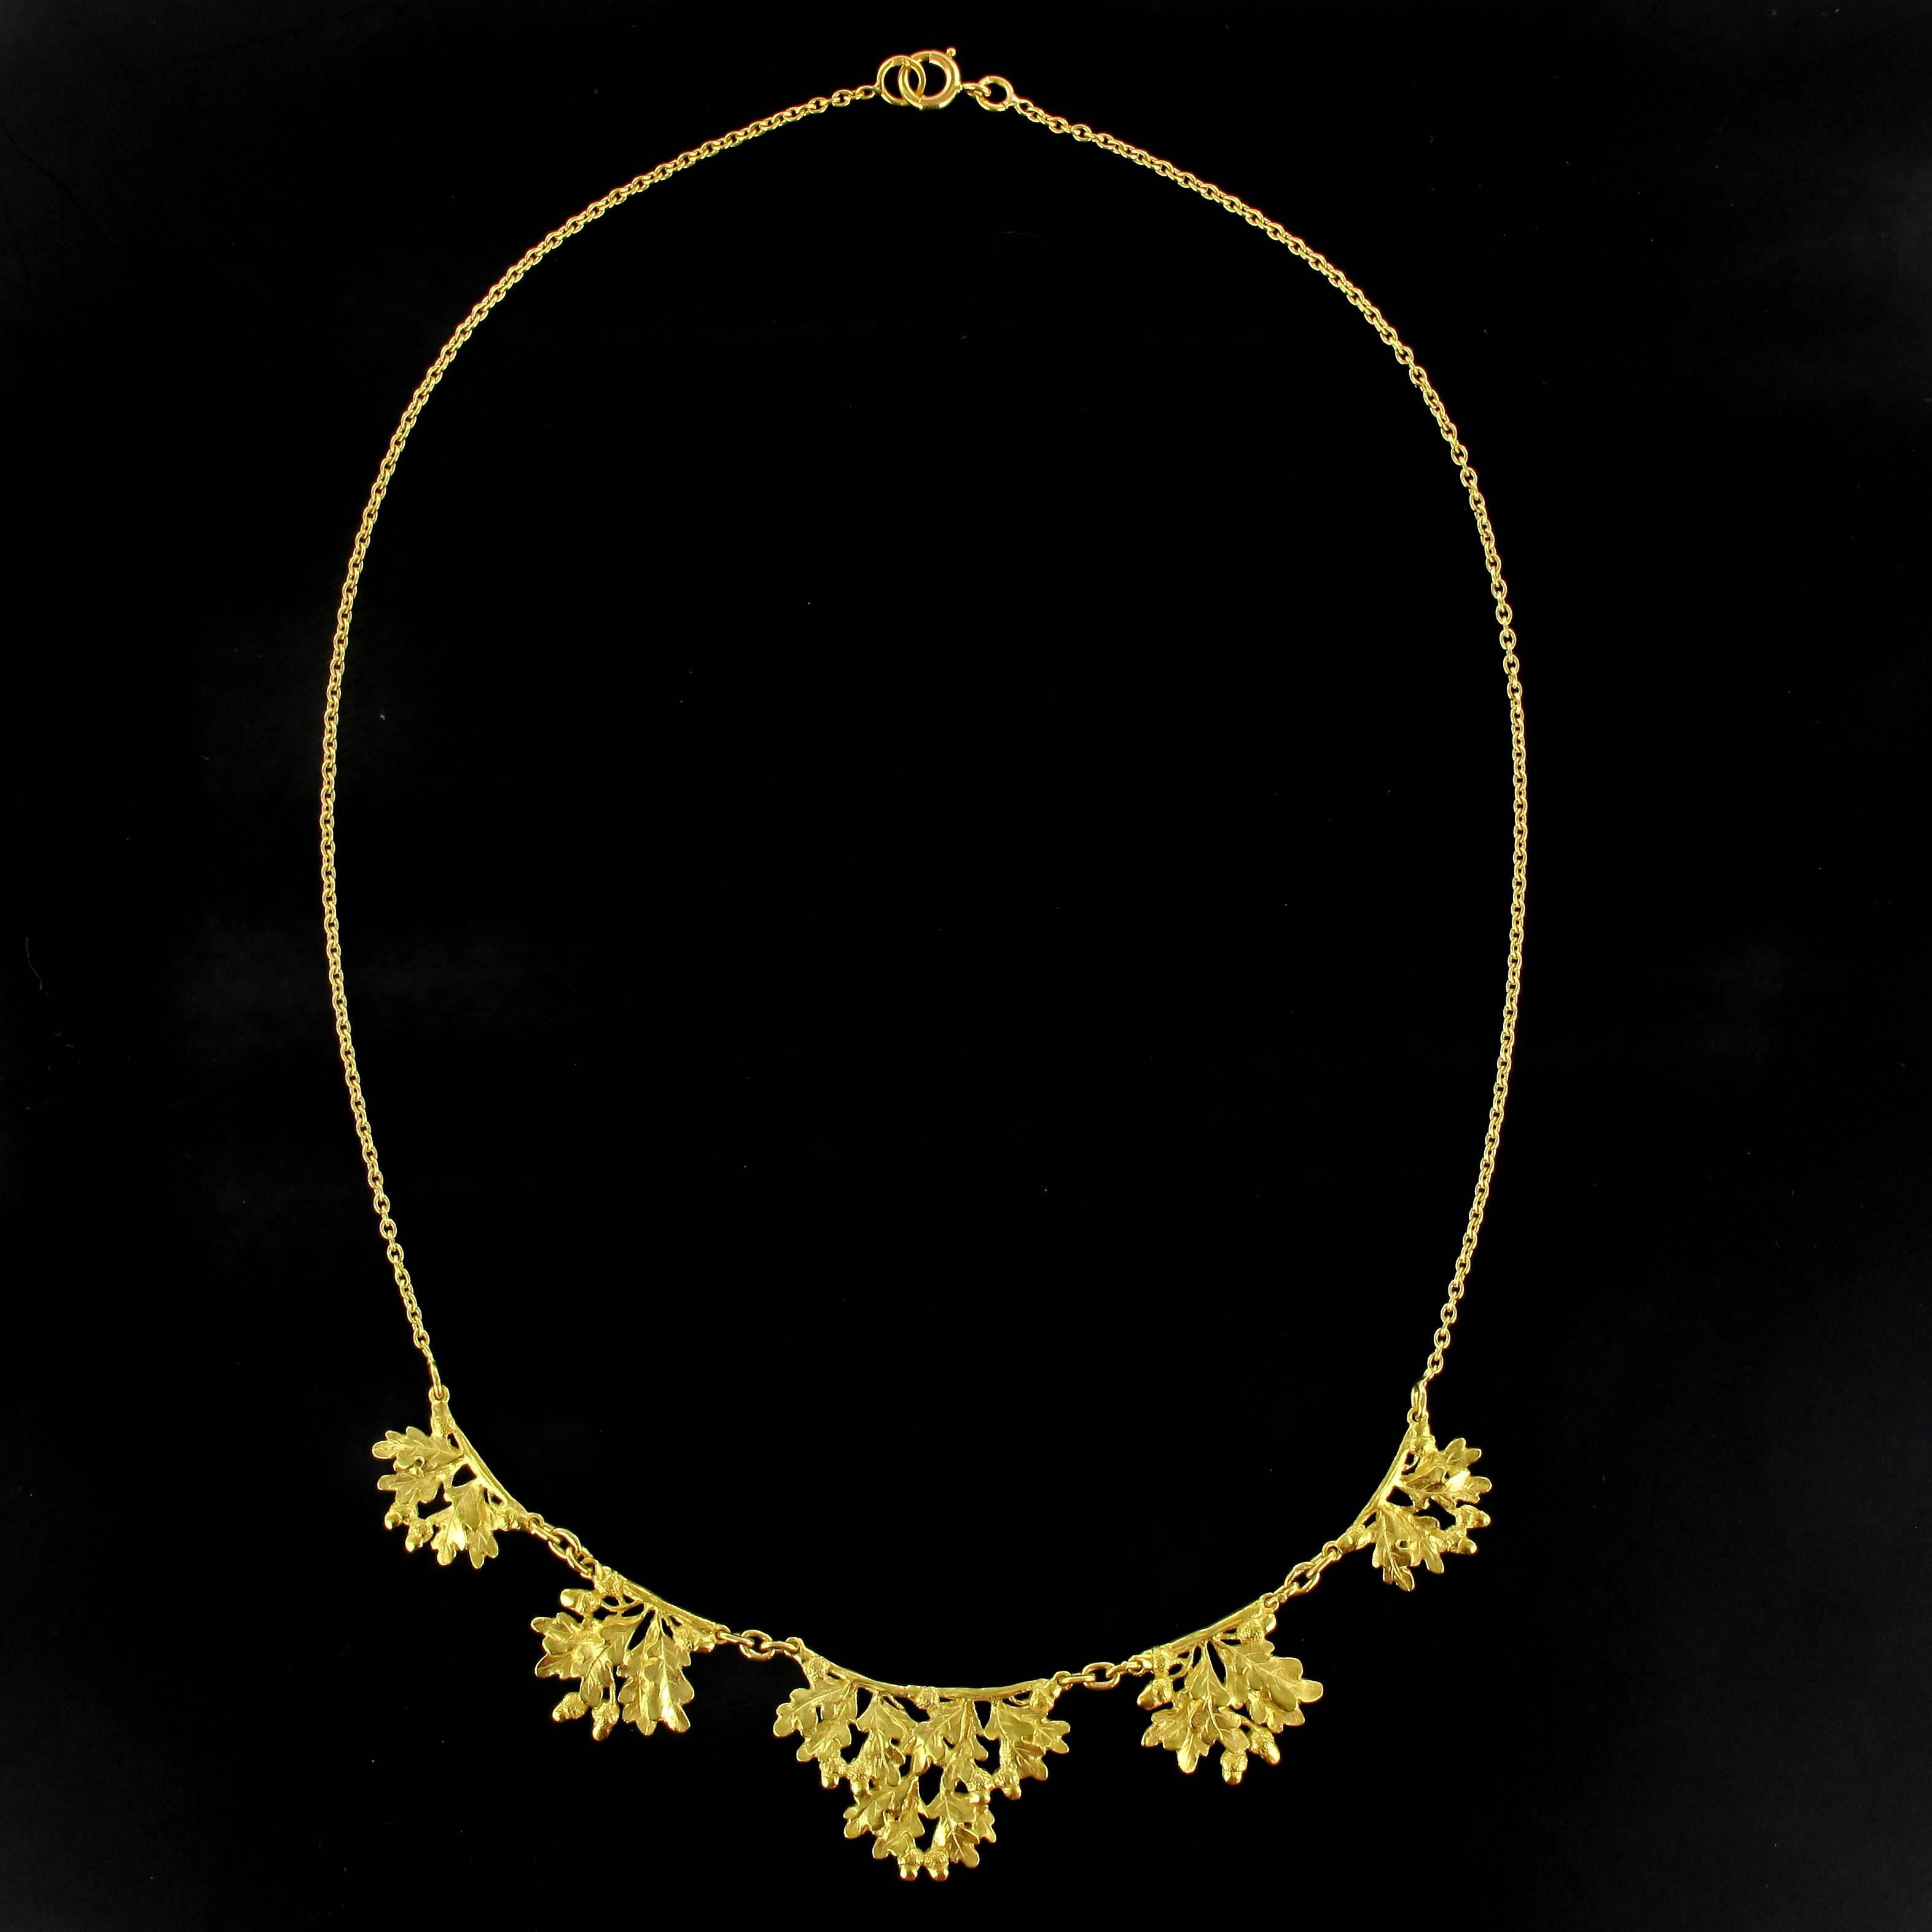 Necklace in 18 carat yellow gold, eagle head hallmark. 

This necklace depicts oak leaves on 5 motifs displayed on a round link type gold chain. 

Chain length: 43 cm, thickness: 1 mm.
Total weight of the jewel: about 13.4 g.

New Jewel in